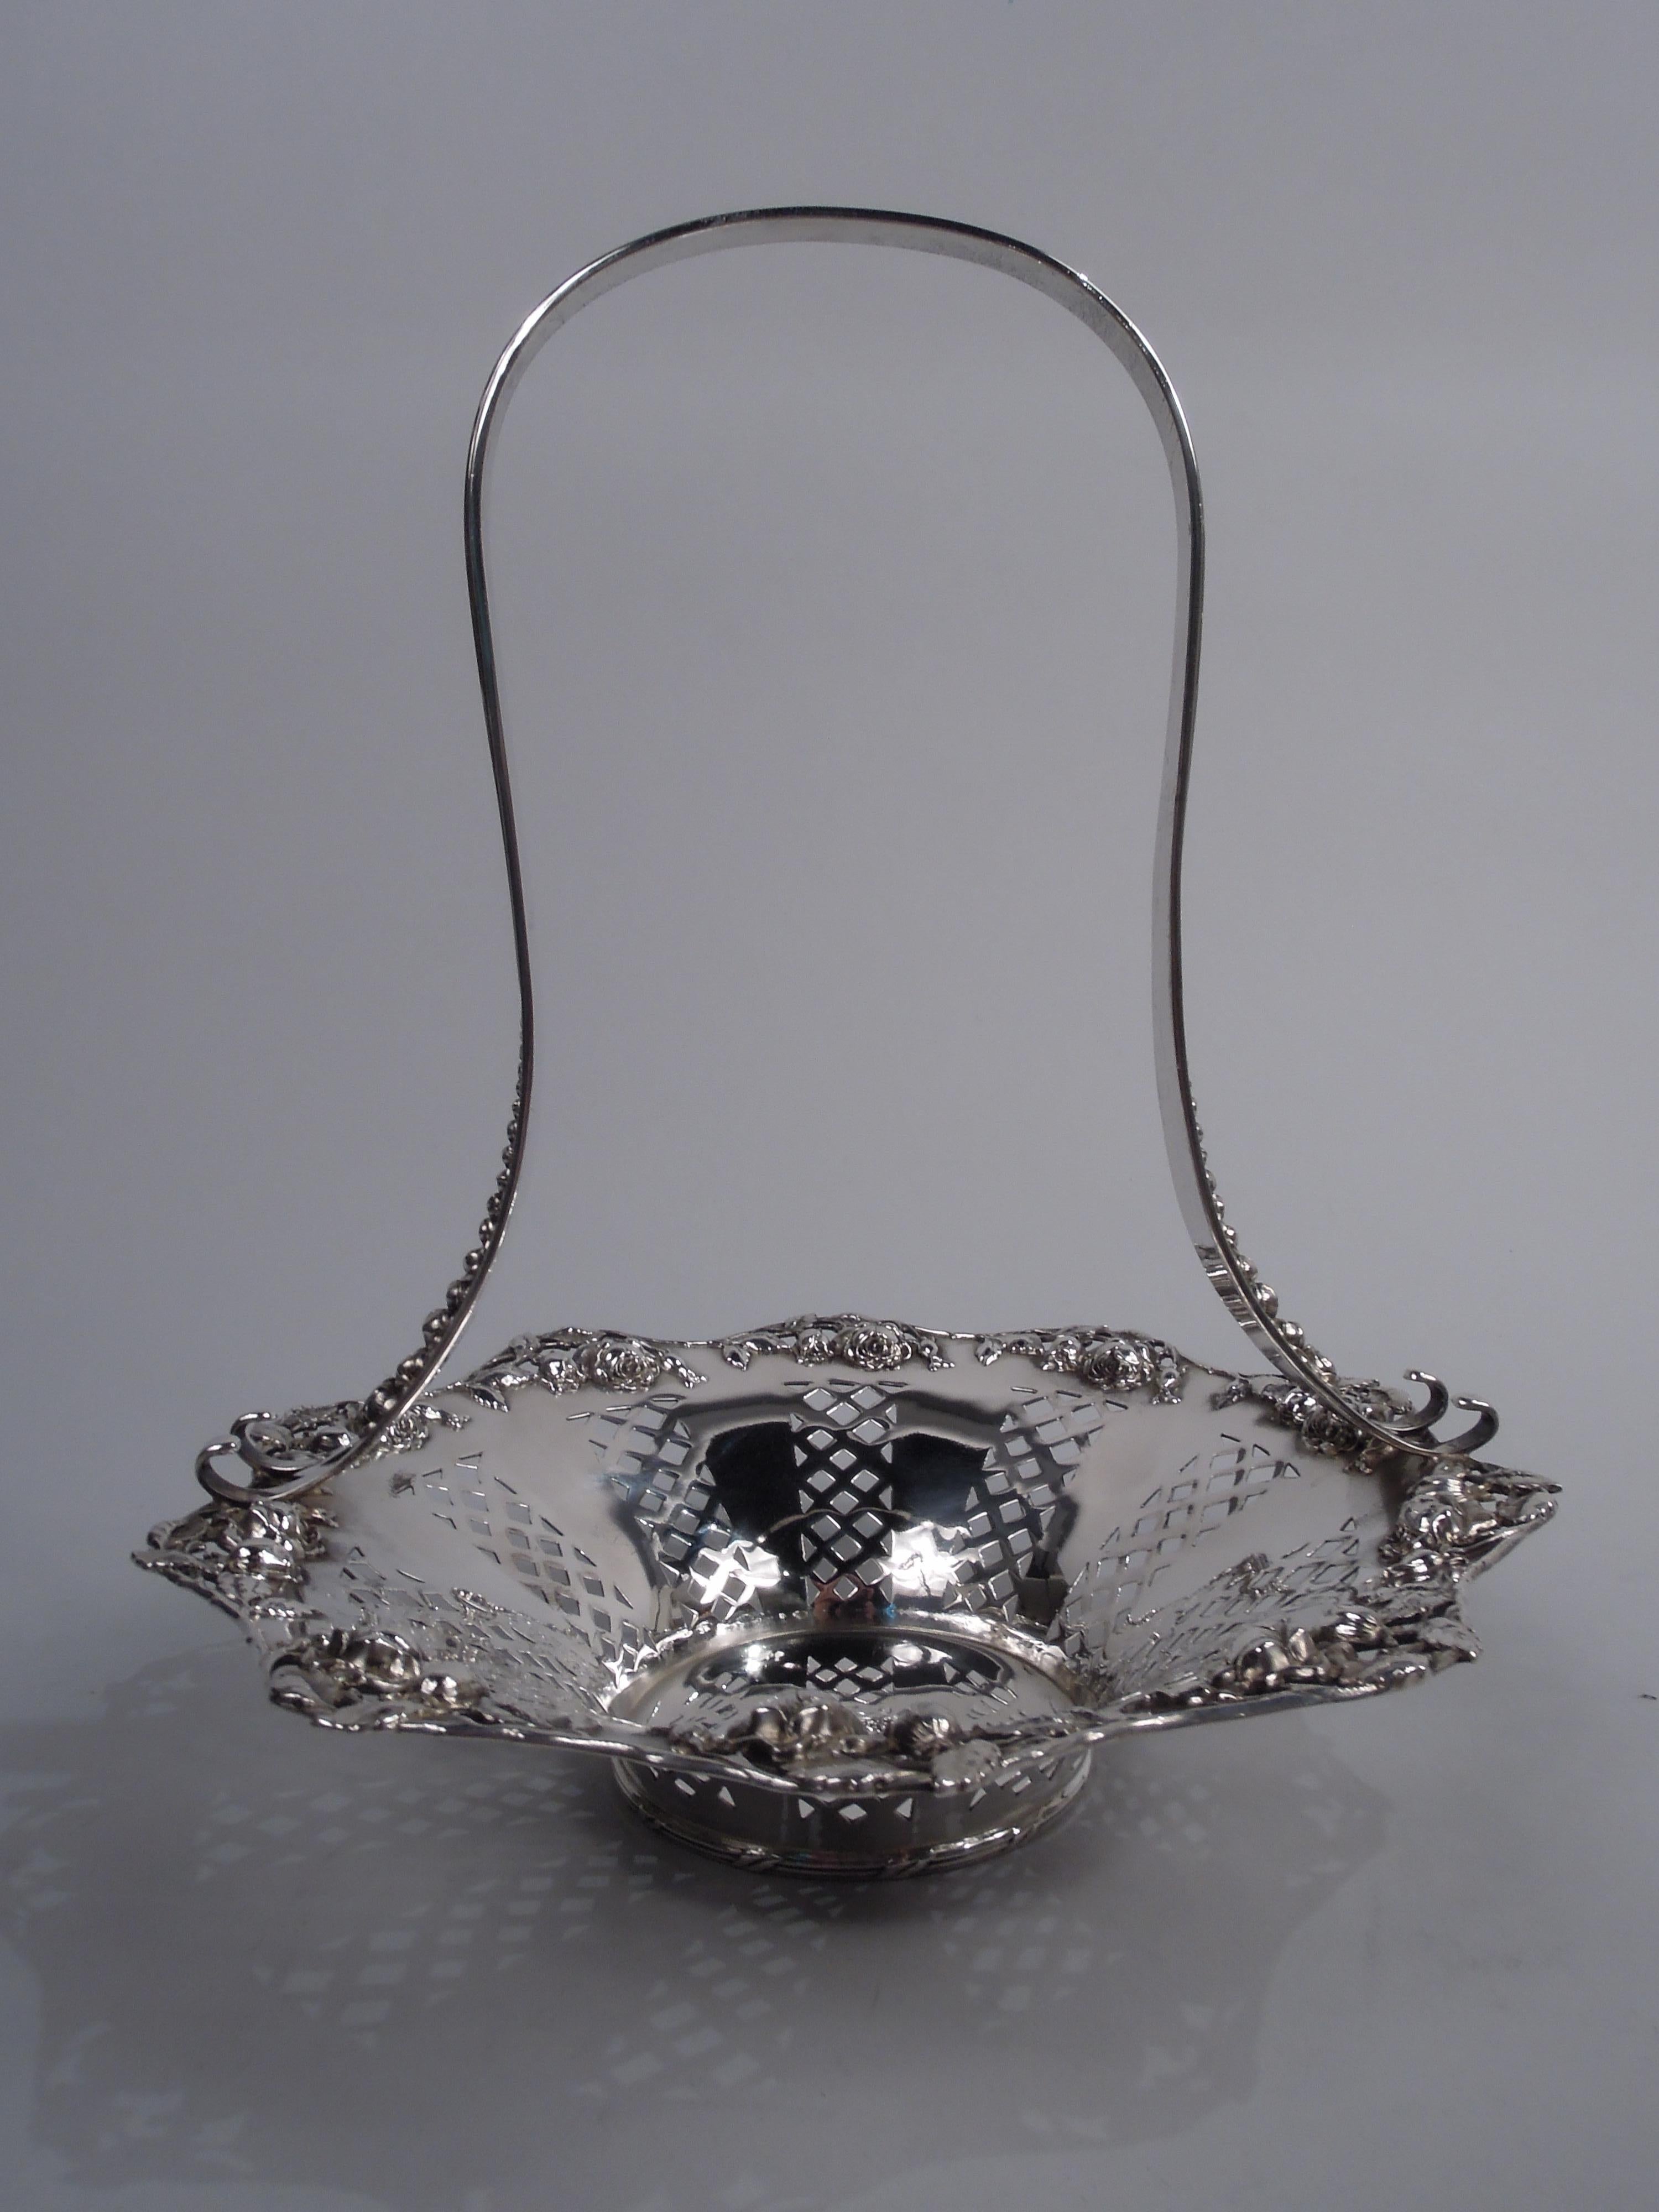 Pretty Edwardian sterling silver basket with roses. Made by Tiffany & Co. in New York. Circular well with flared sides and wide mouth. Sides have alternating solid and pierced trellis. Scrolled and wavy rim in form of flowering rose vine with both